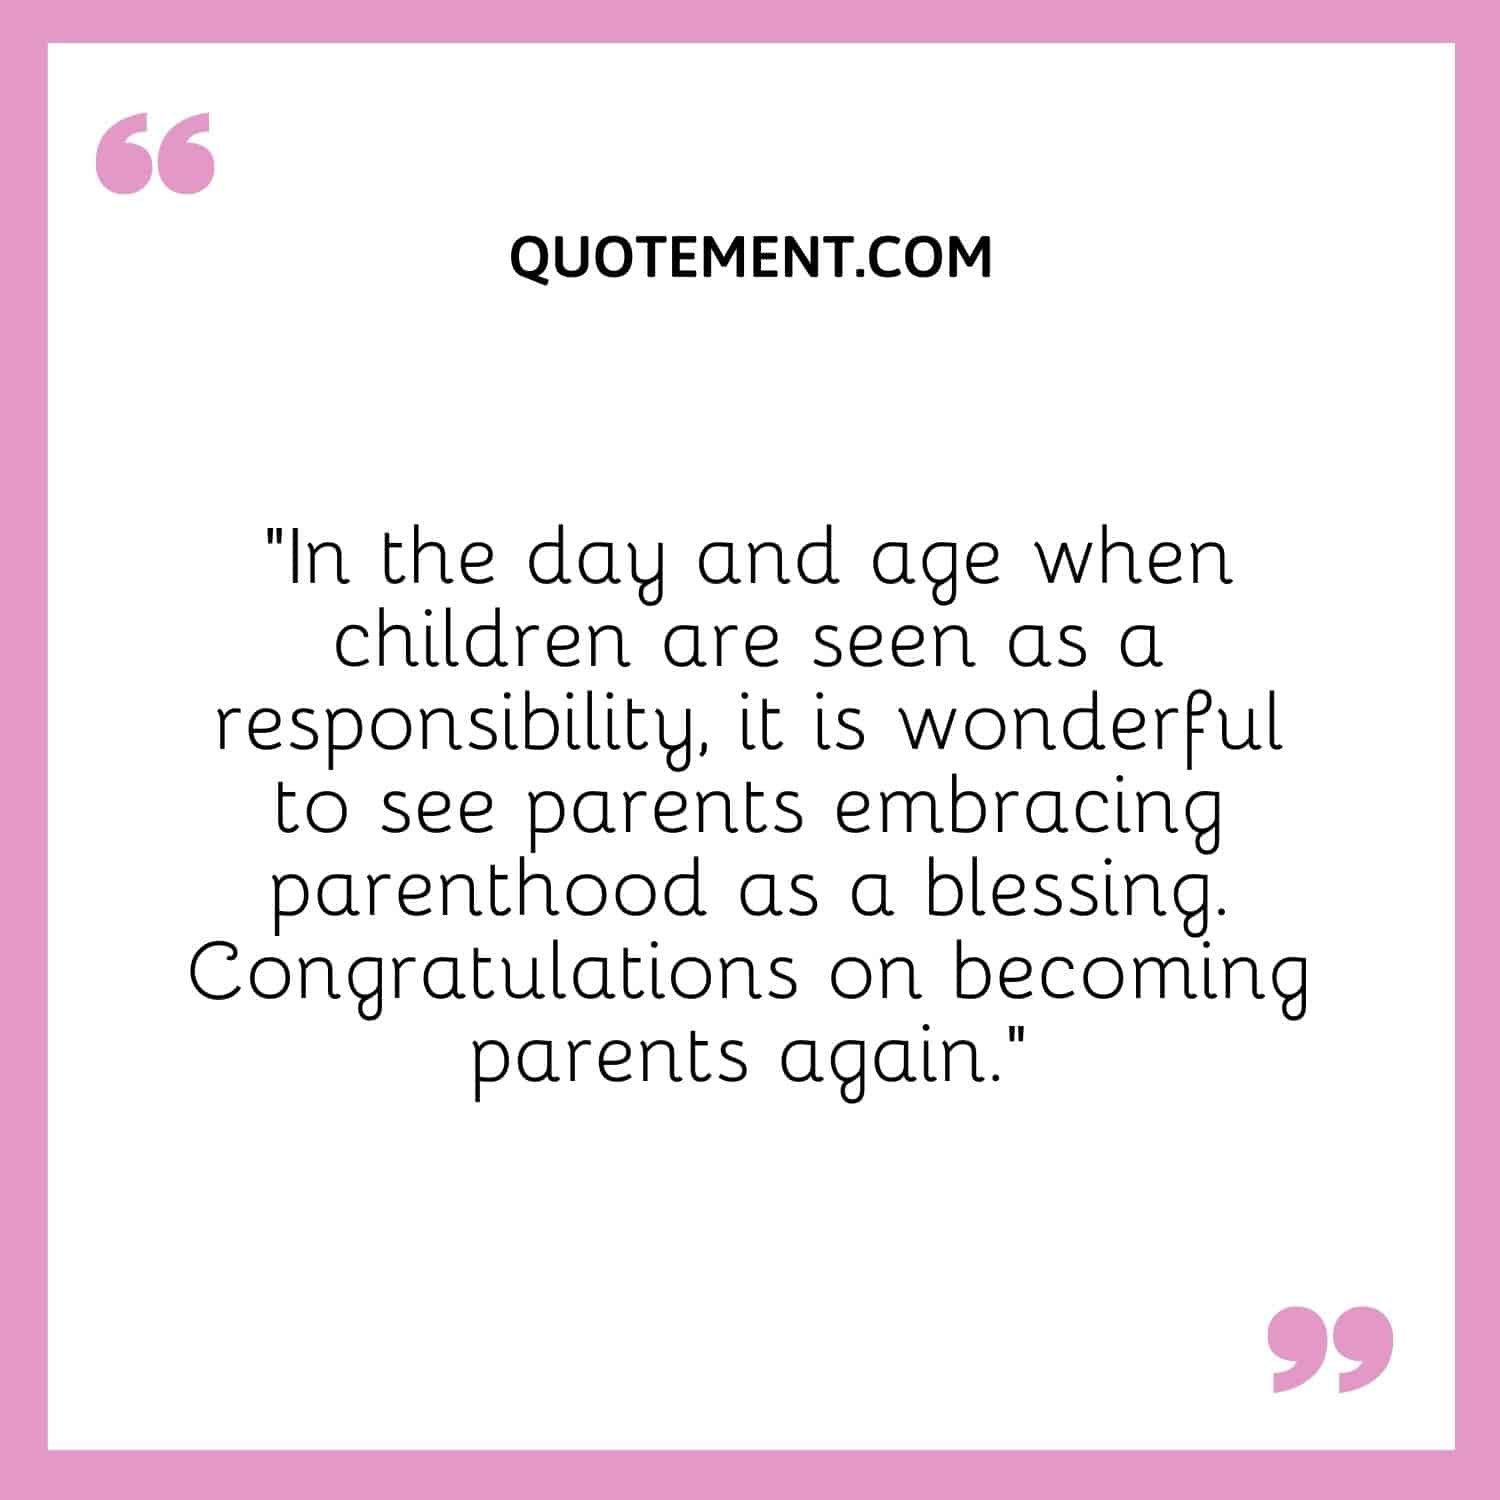 In the day and age when children are seen as a responsibility, it is wonderful to see parents embracing parenthood as a blessing.